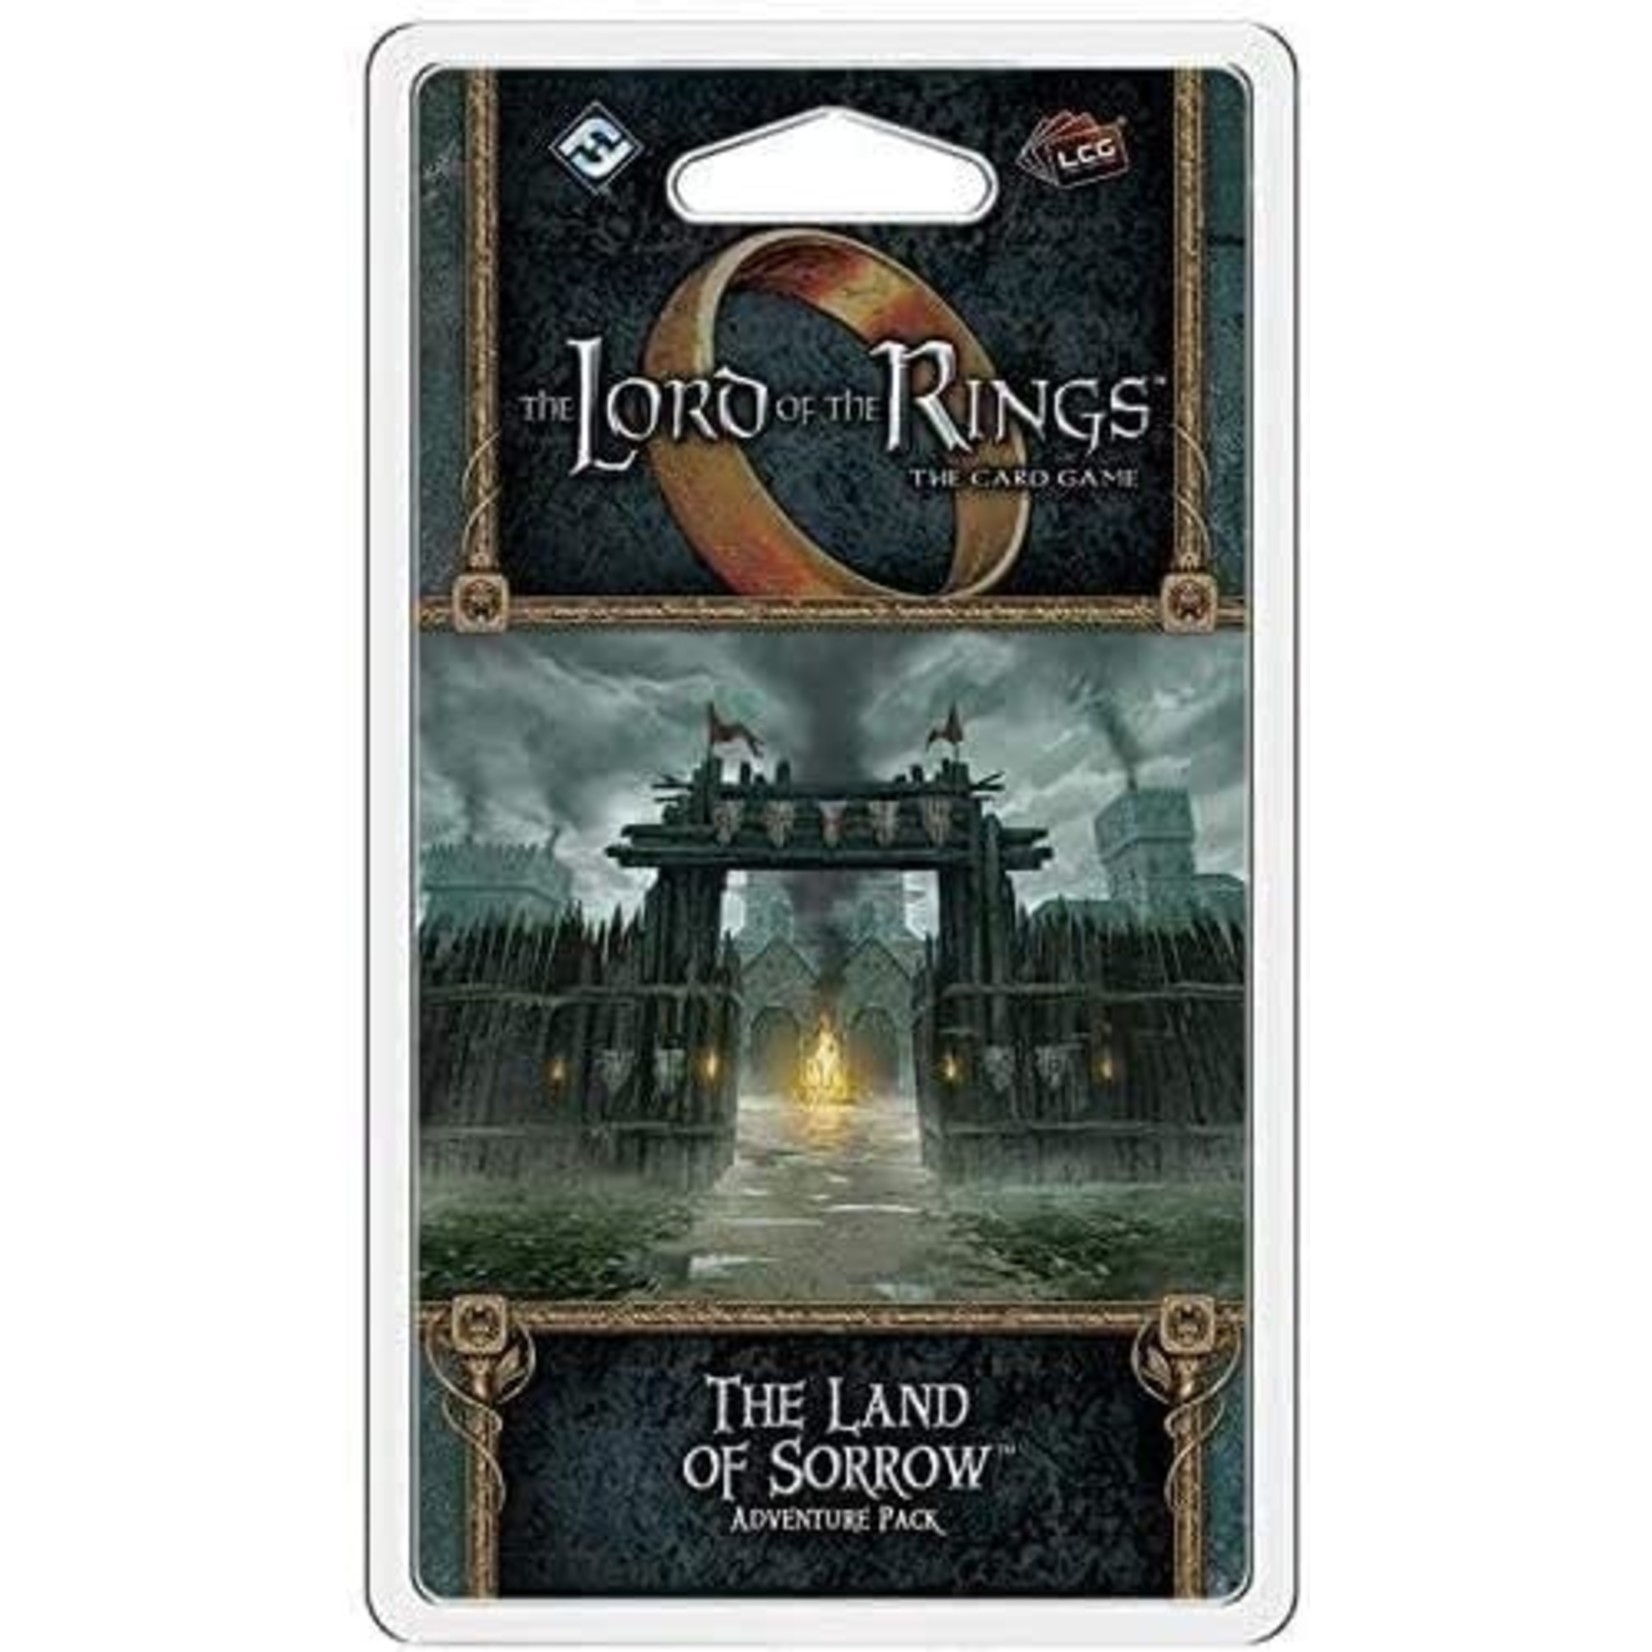 The Lord of the Rings LCG: The Land of Sorrow Adventure Pack